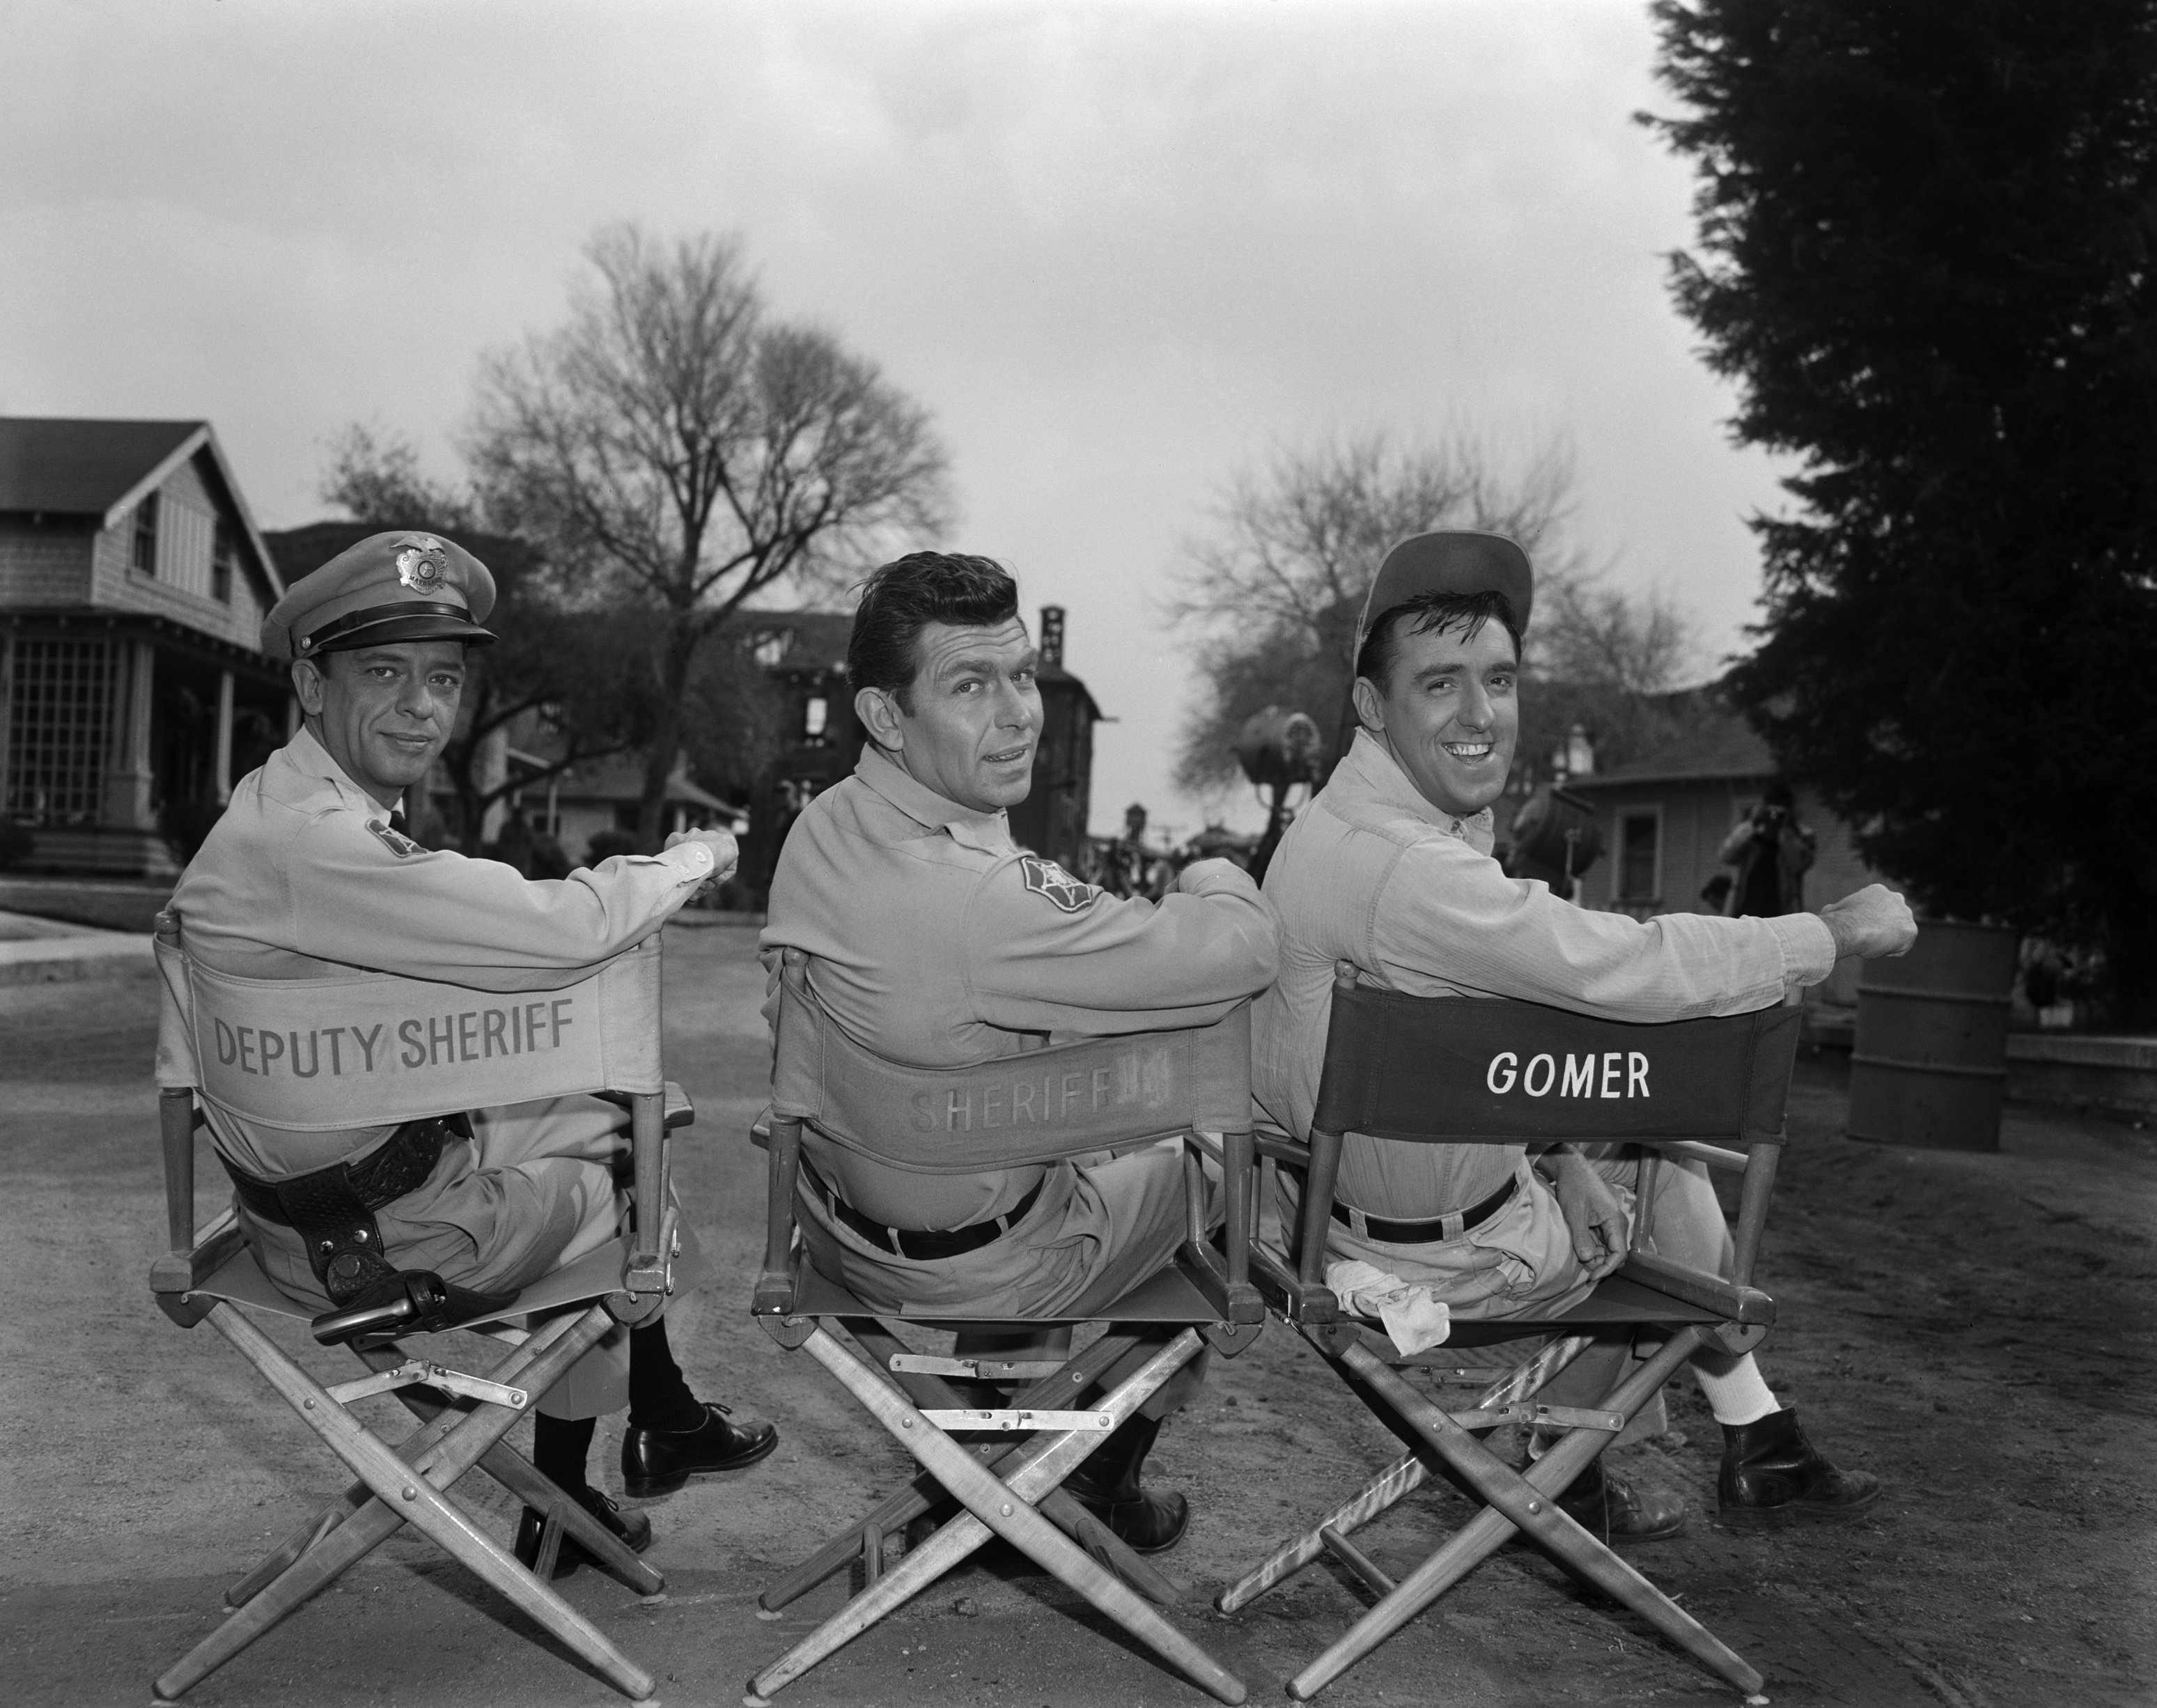 From left: Don Knotts, Andy Griffith, and Jim Nabors of 'The Andy Griffith Show'